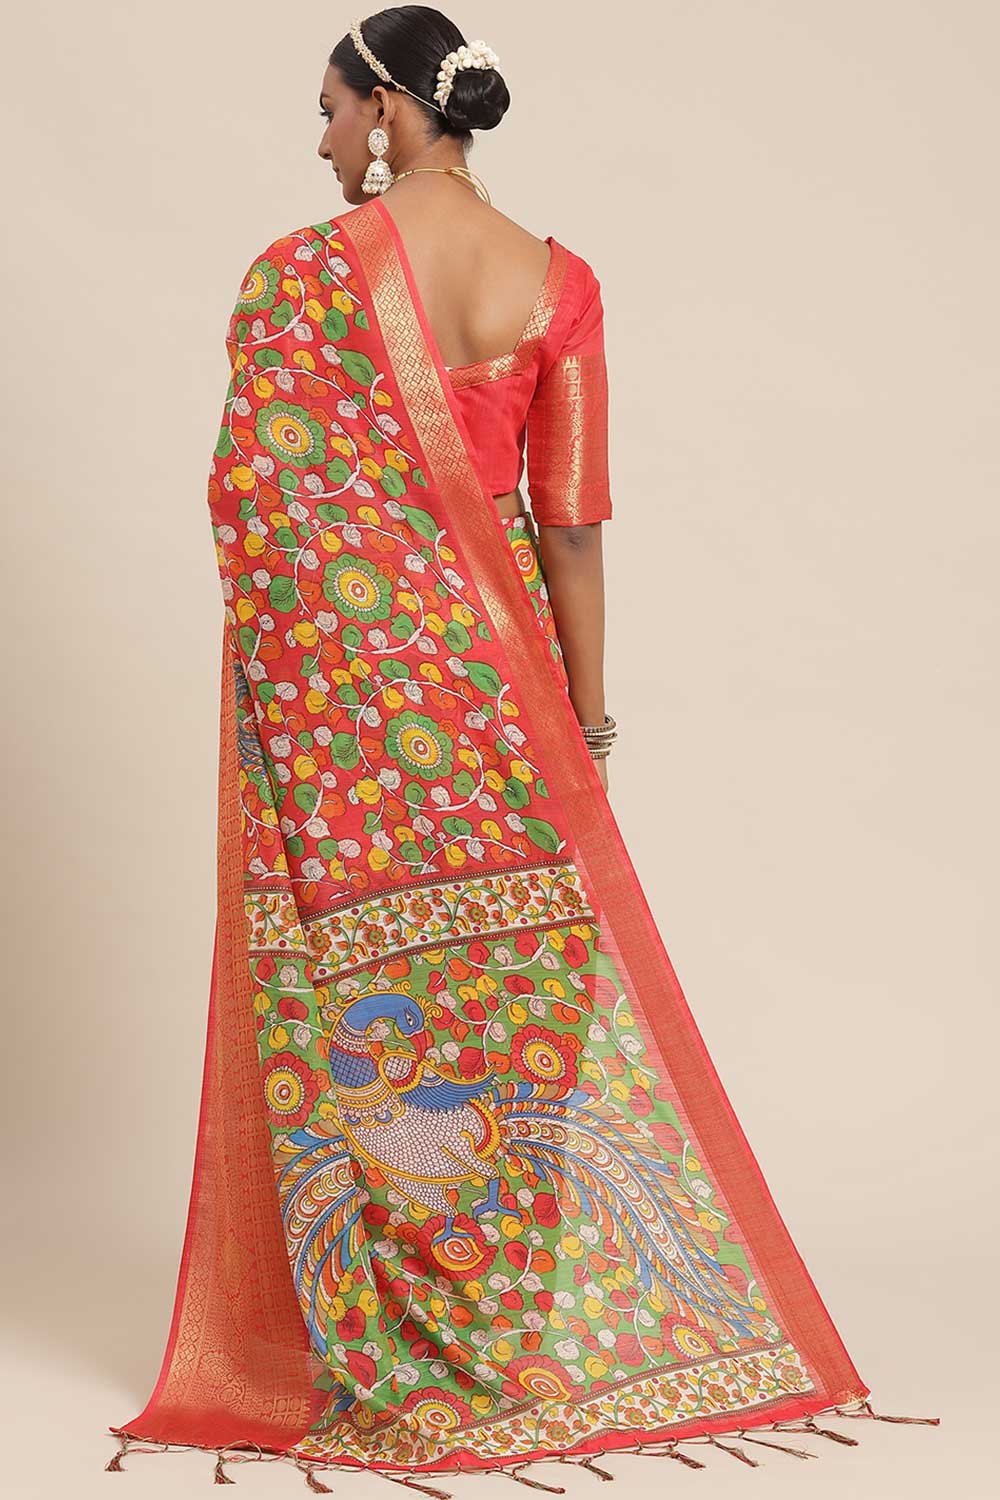 Shop Priya Red Kalamkari Blended Cotton One Minute Saree at best offer at our  Store - One Minute Saree